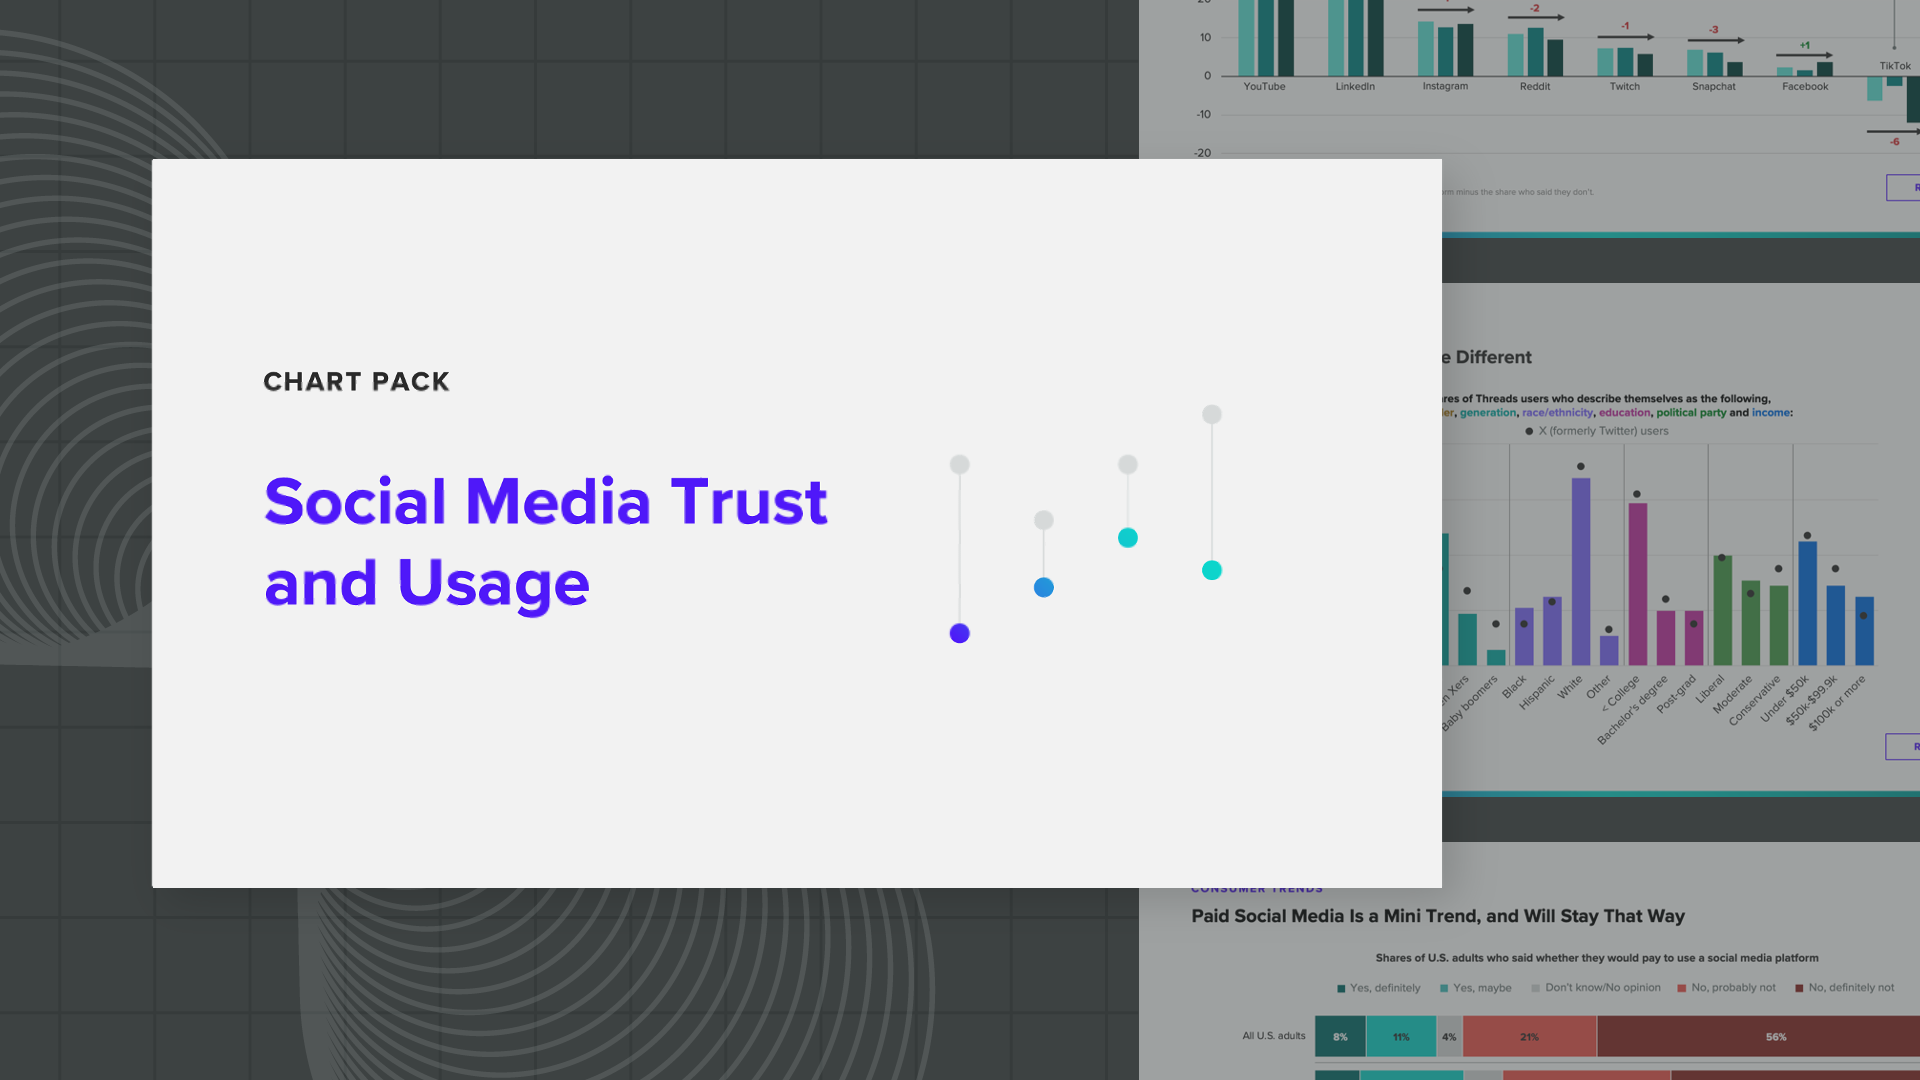 Download the Chart Pack: Social Media Trust and Usage